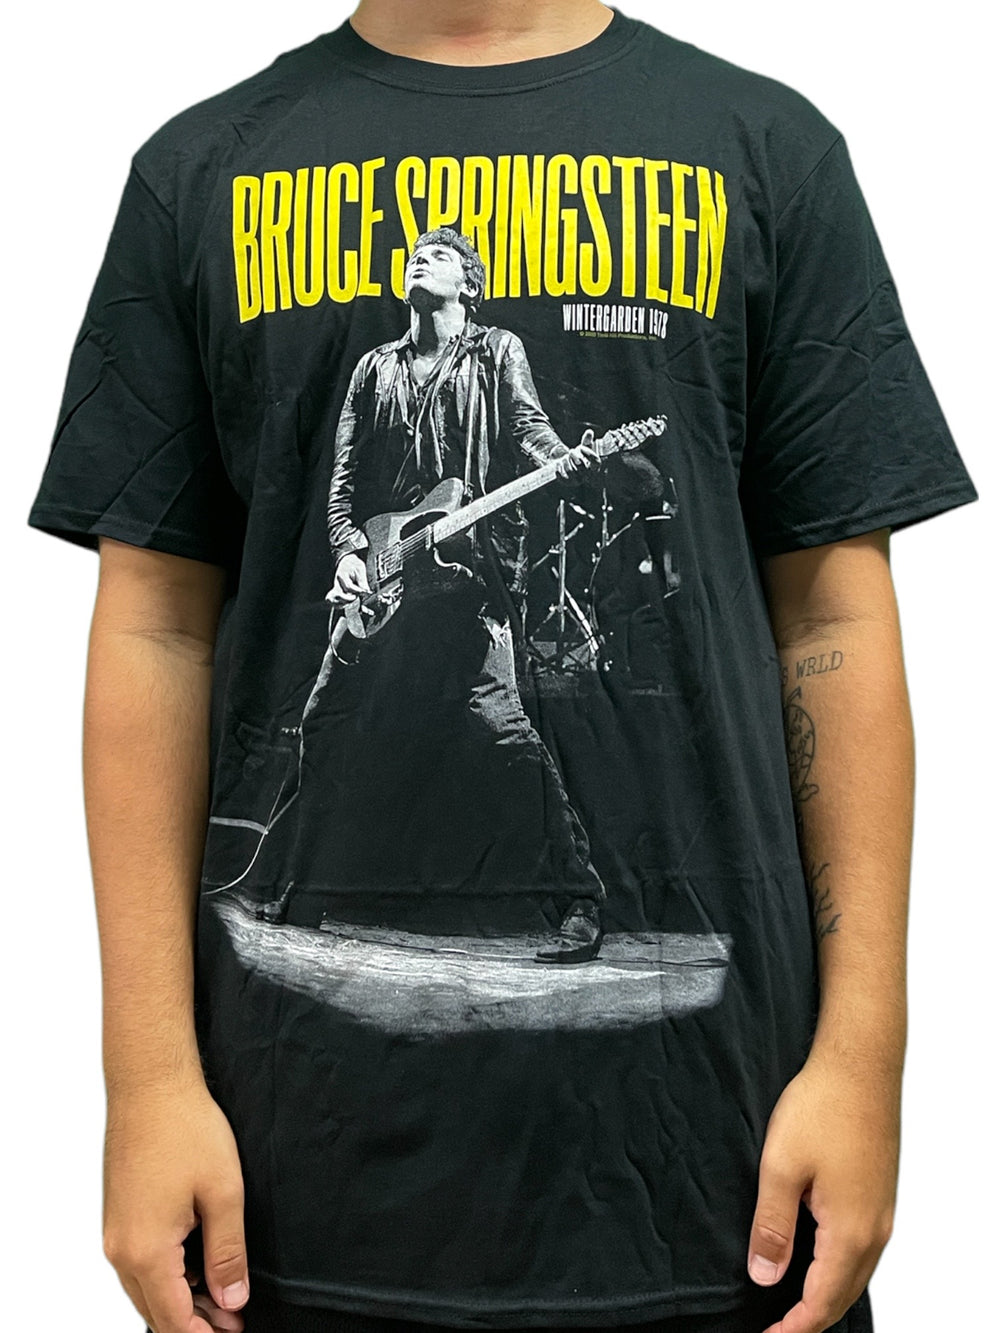 Bruce Springsteen Winterland GUITAR Unisex Official T Shirt Various Sizes Back Printed